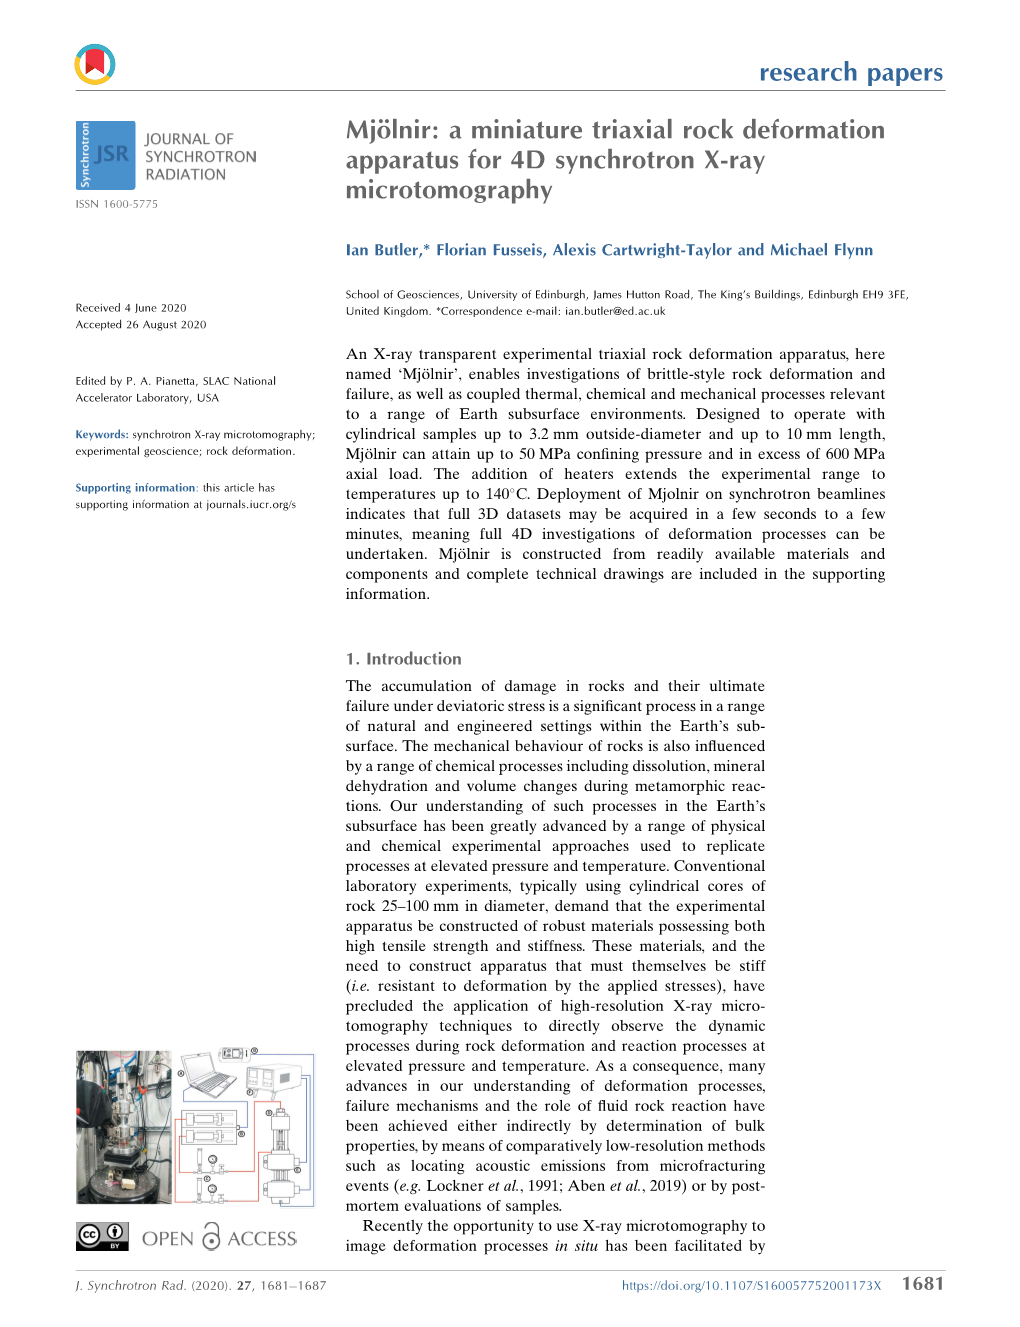 A Miniature Triaxial Rock Deformation Apparatus for 4D Synchrotron X-Ray Microtomography ISSN 1600-5775